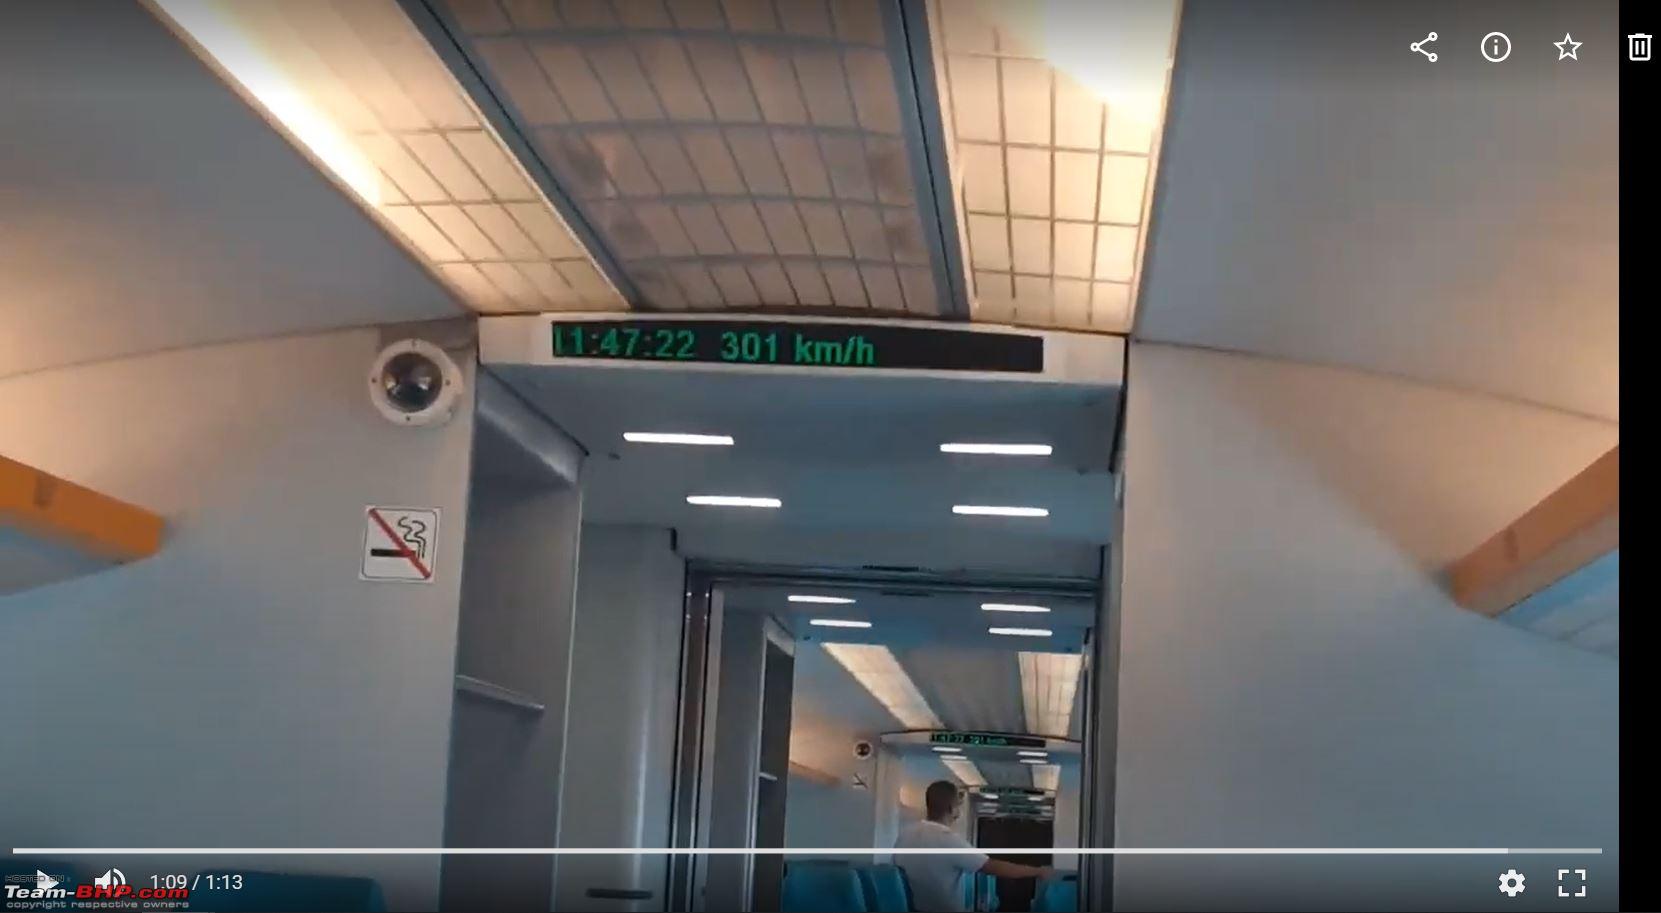 China: New Maglev train with a top speed of 600 km/h unveiled - Team-BHP